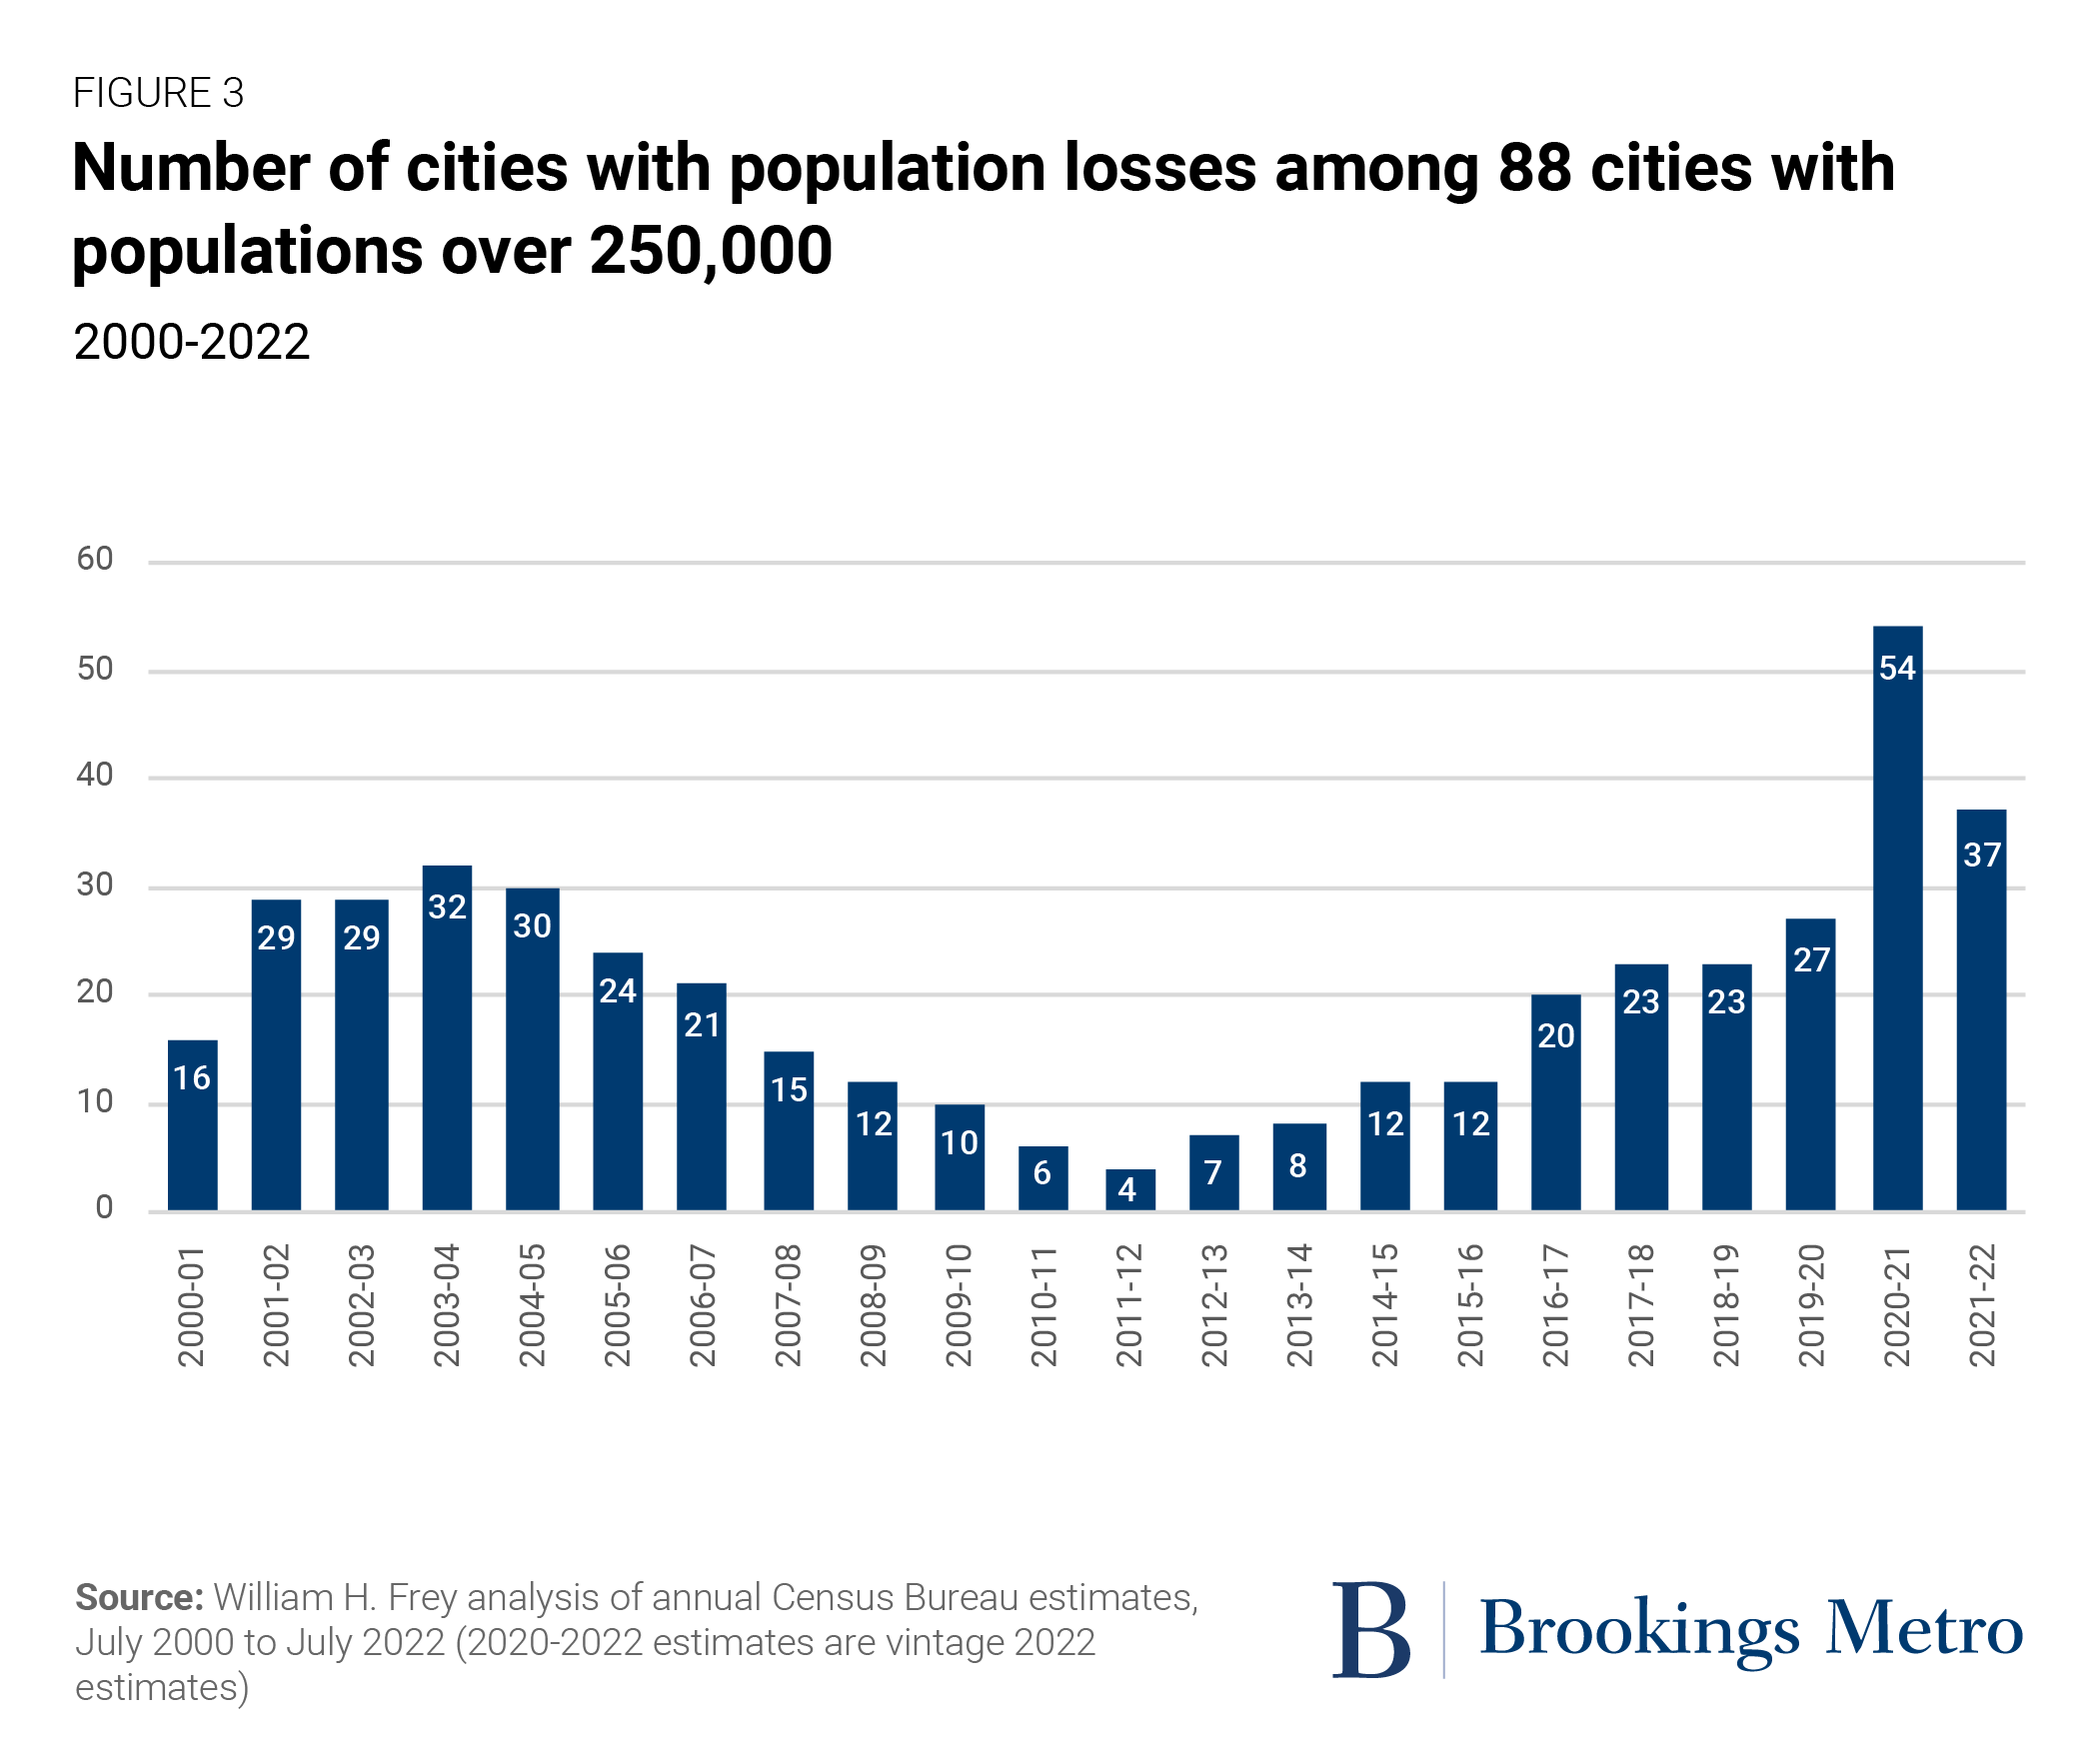 Figure 3: Number of cities with population losses among 88 cities with populations over 250,000